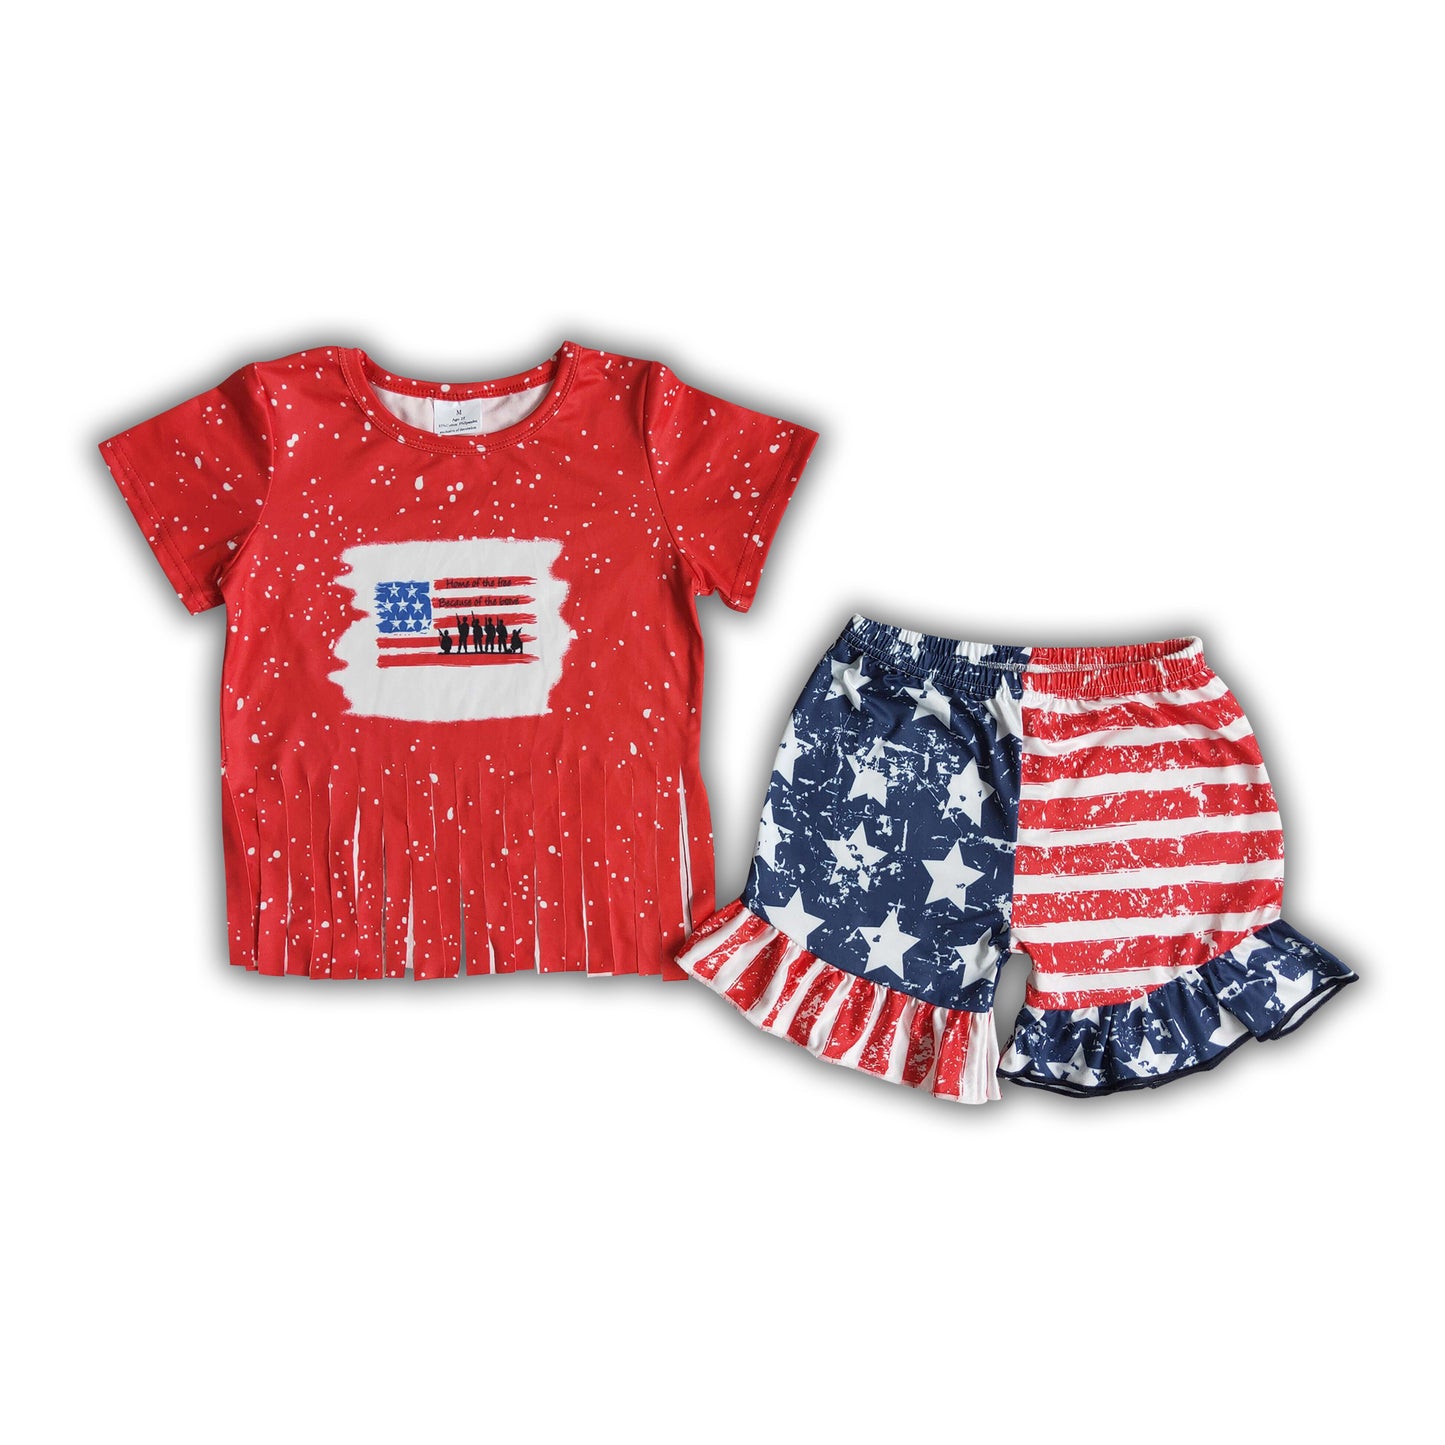 Homes of the free because of brave girls 4th of july clothes